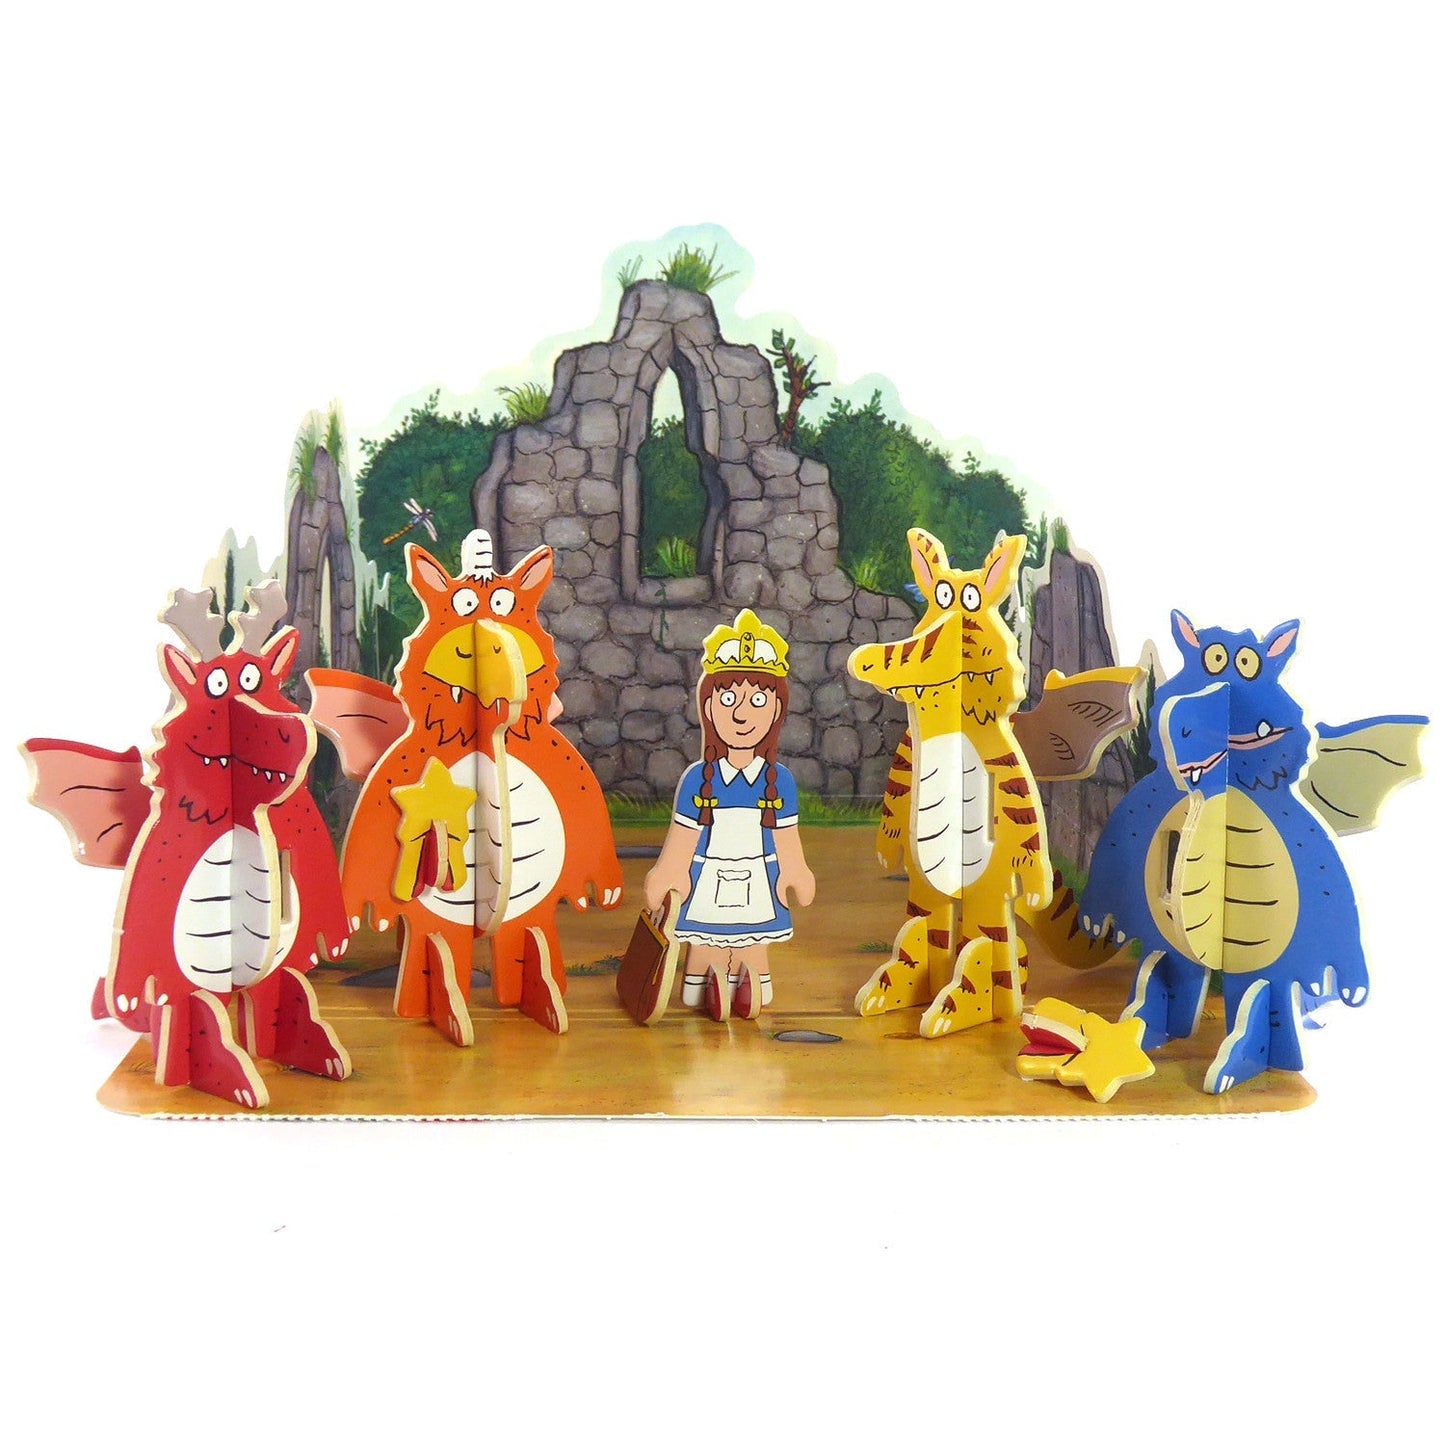 PlayPress Zog Playset - Eco-friendly and creative set for imaginative and sustainable storytelling